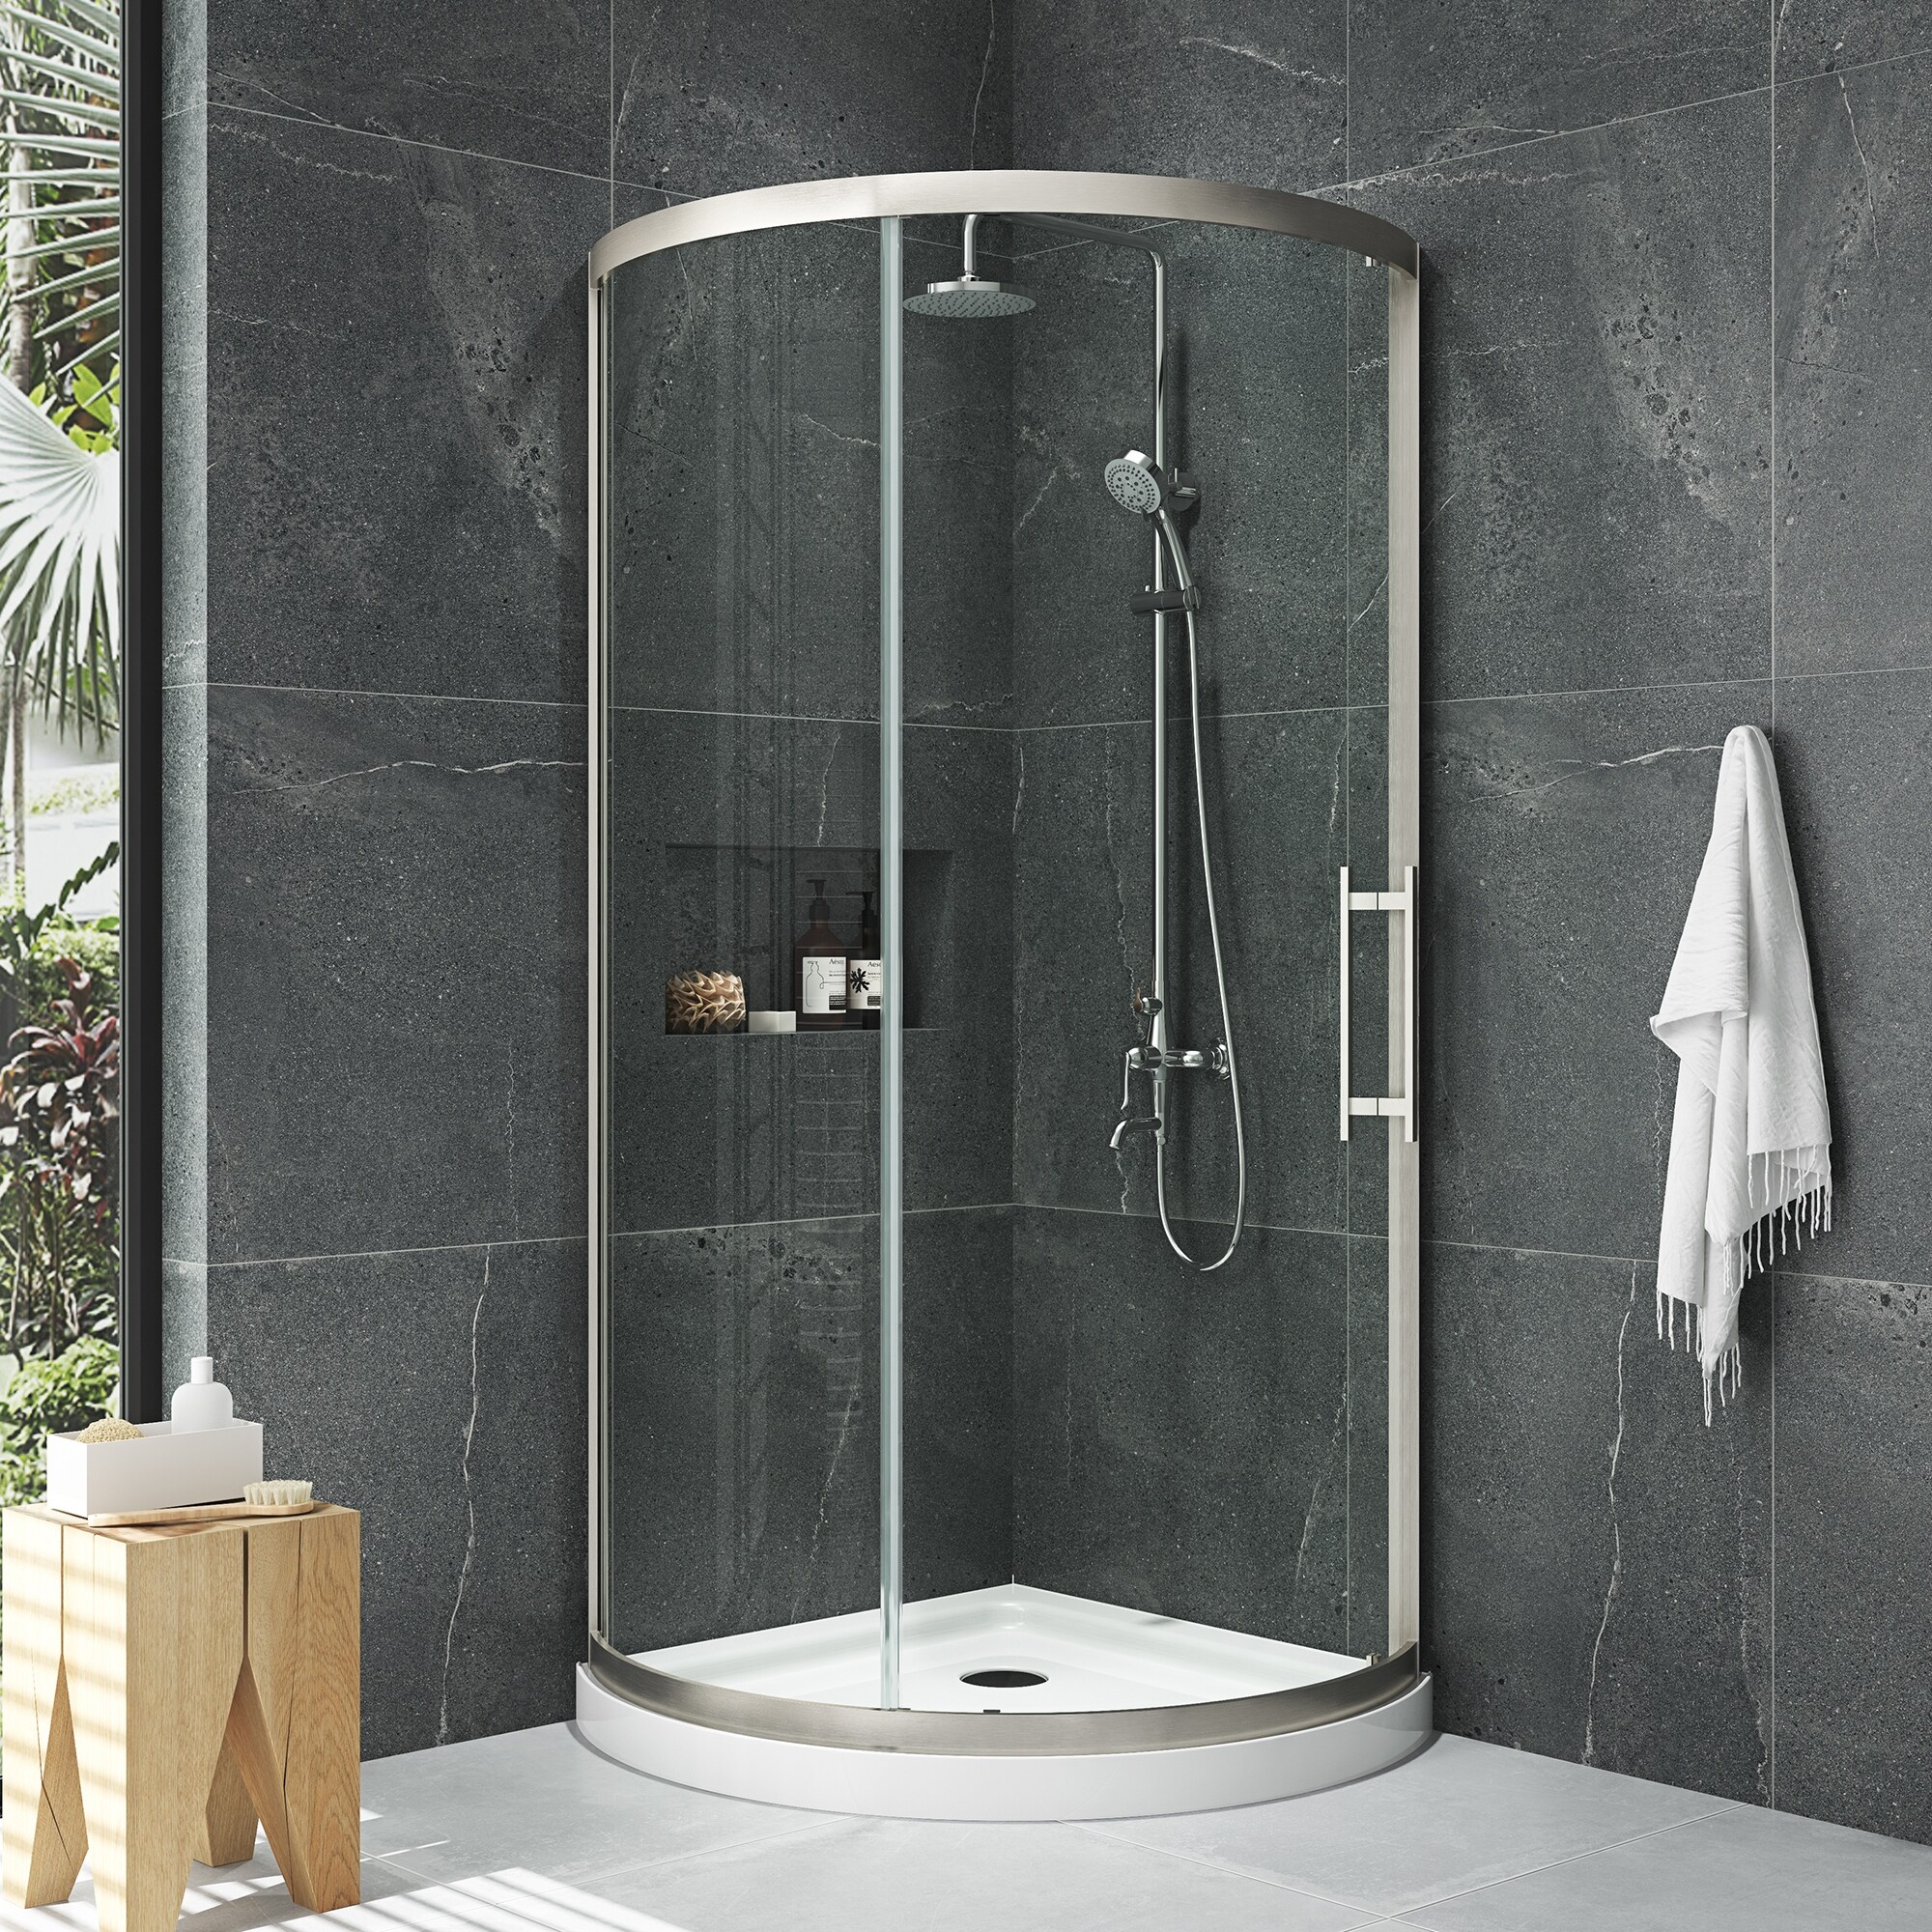 Ove Decors Breeze Shower Kit with Wall and Base